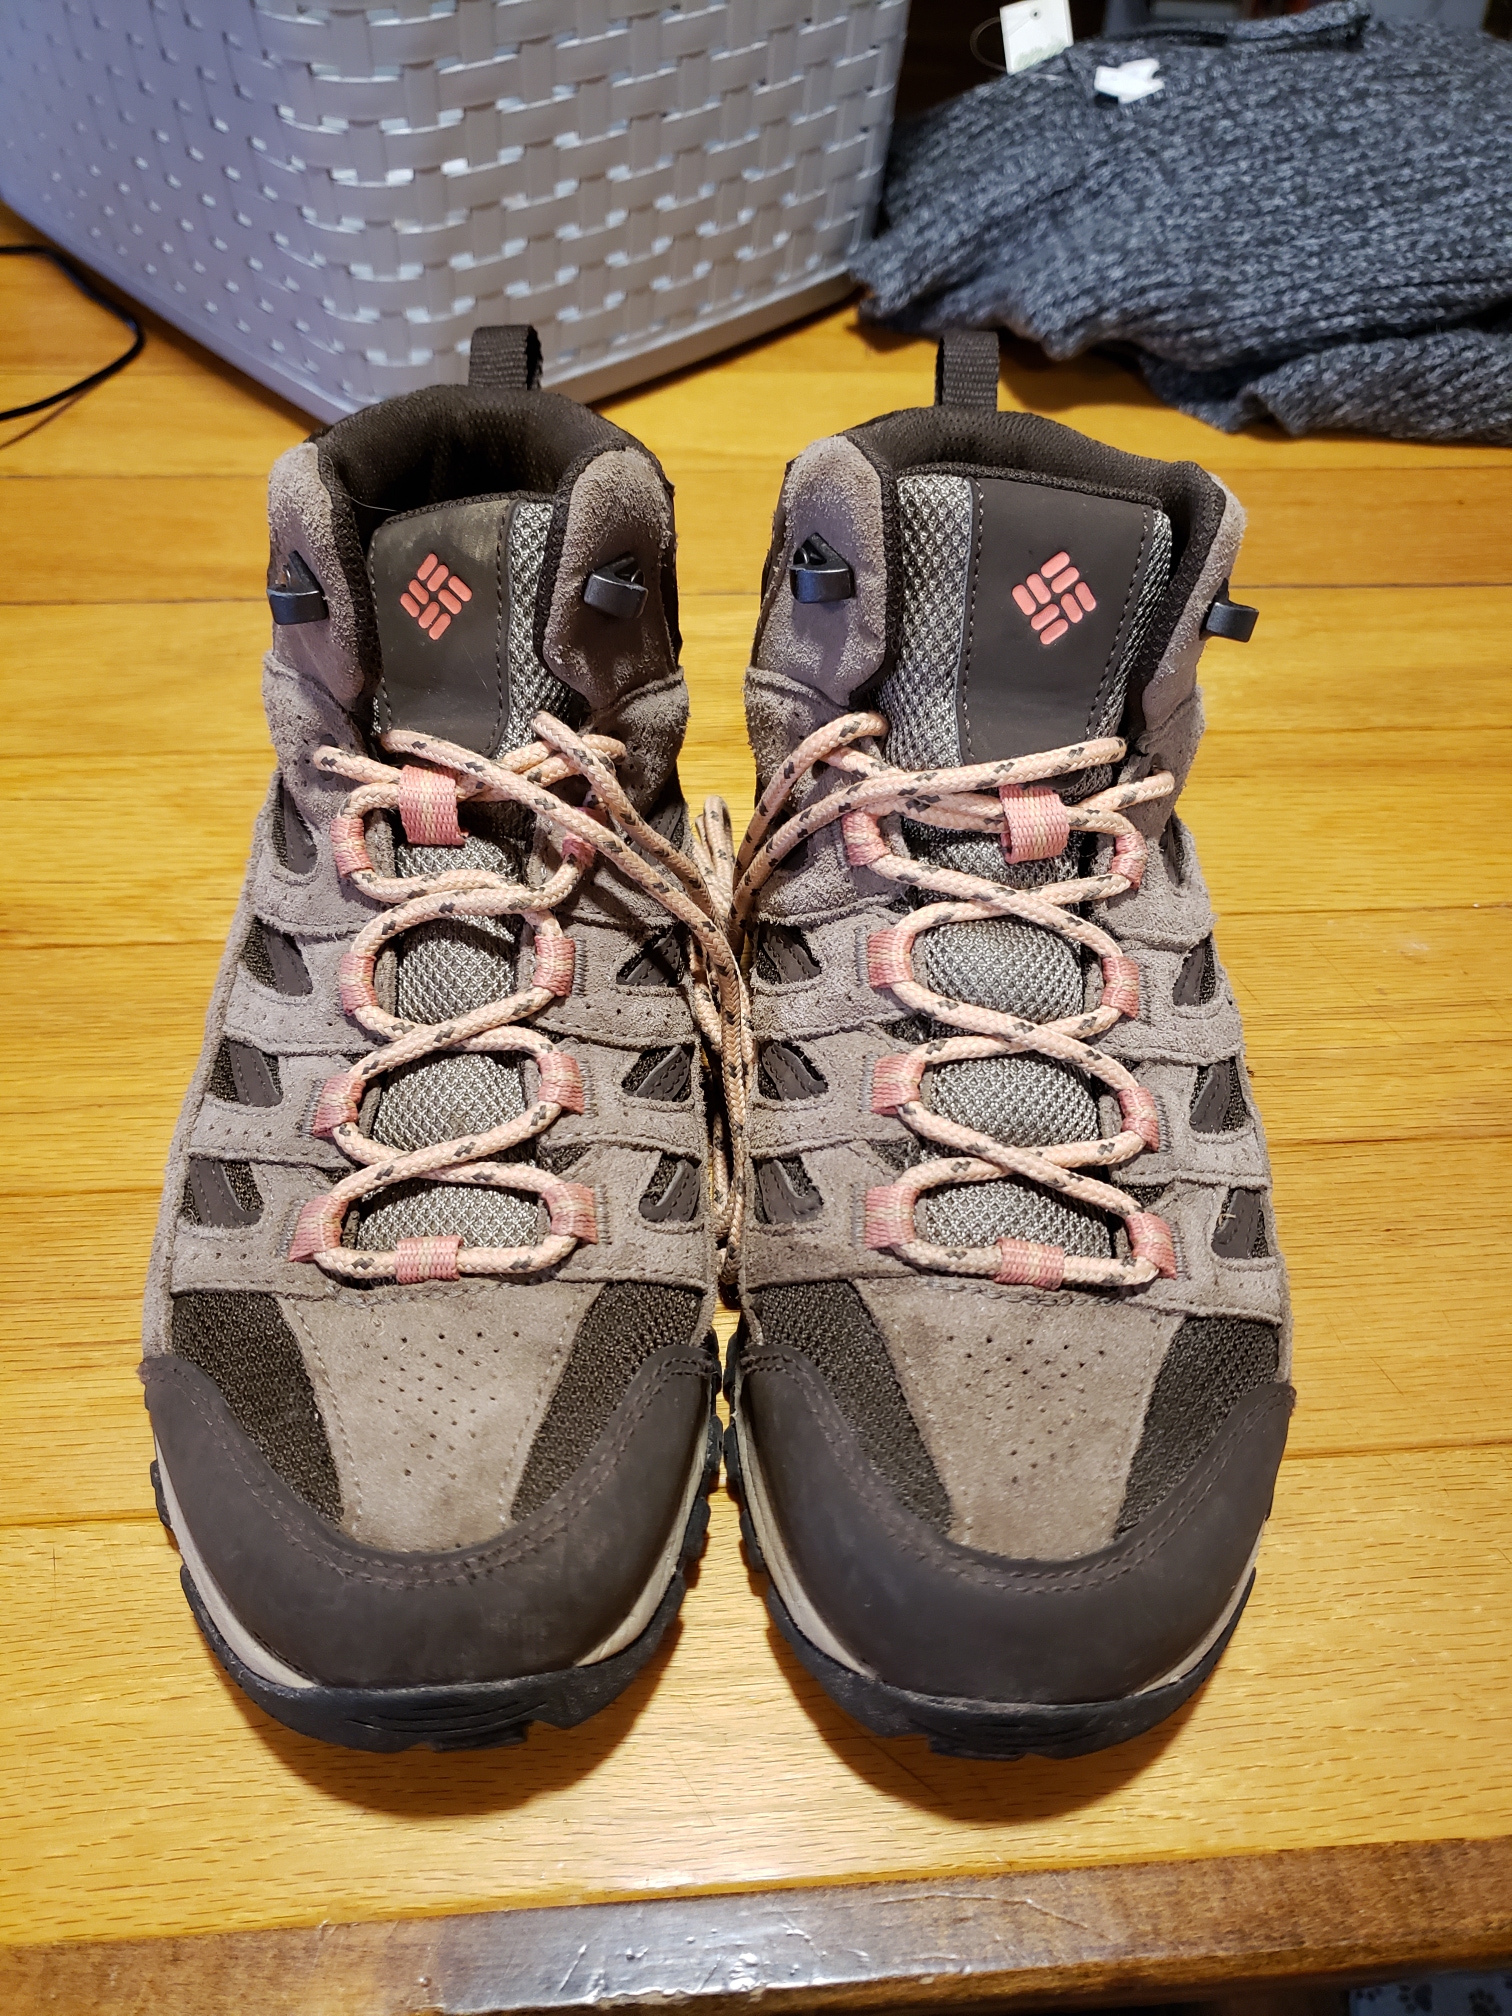 Columbia Women's Size 8.5 Hiking boots